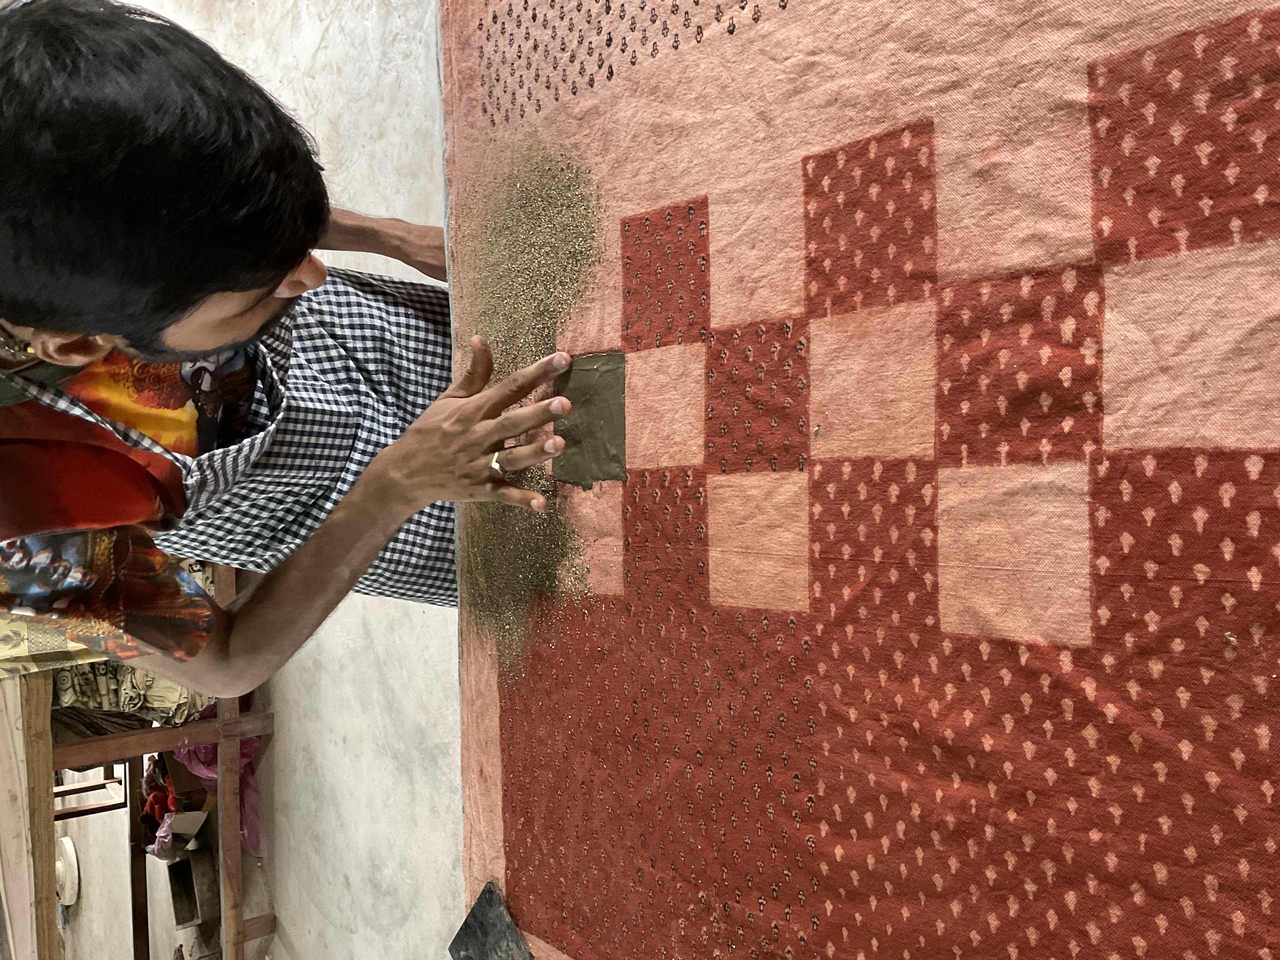 A man applying Dabu, a mud resist material to the block printed piece of fabric.